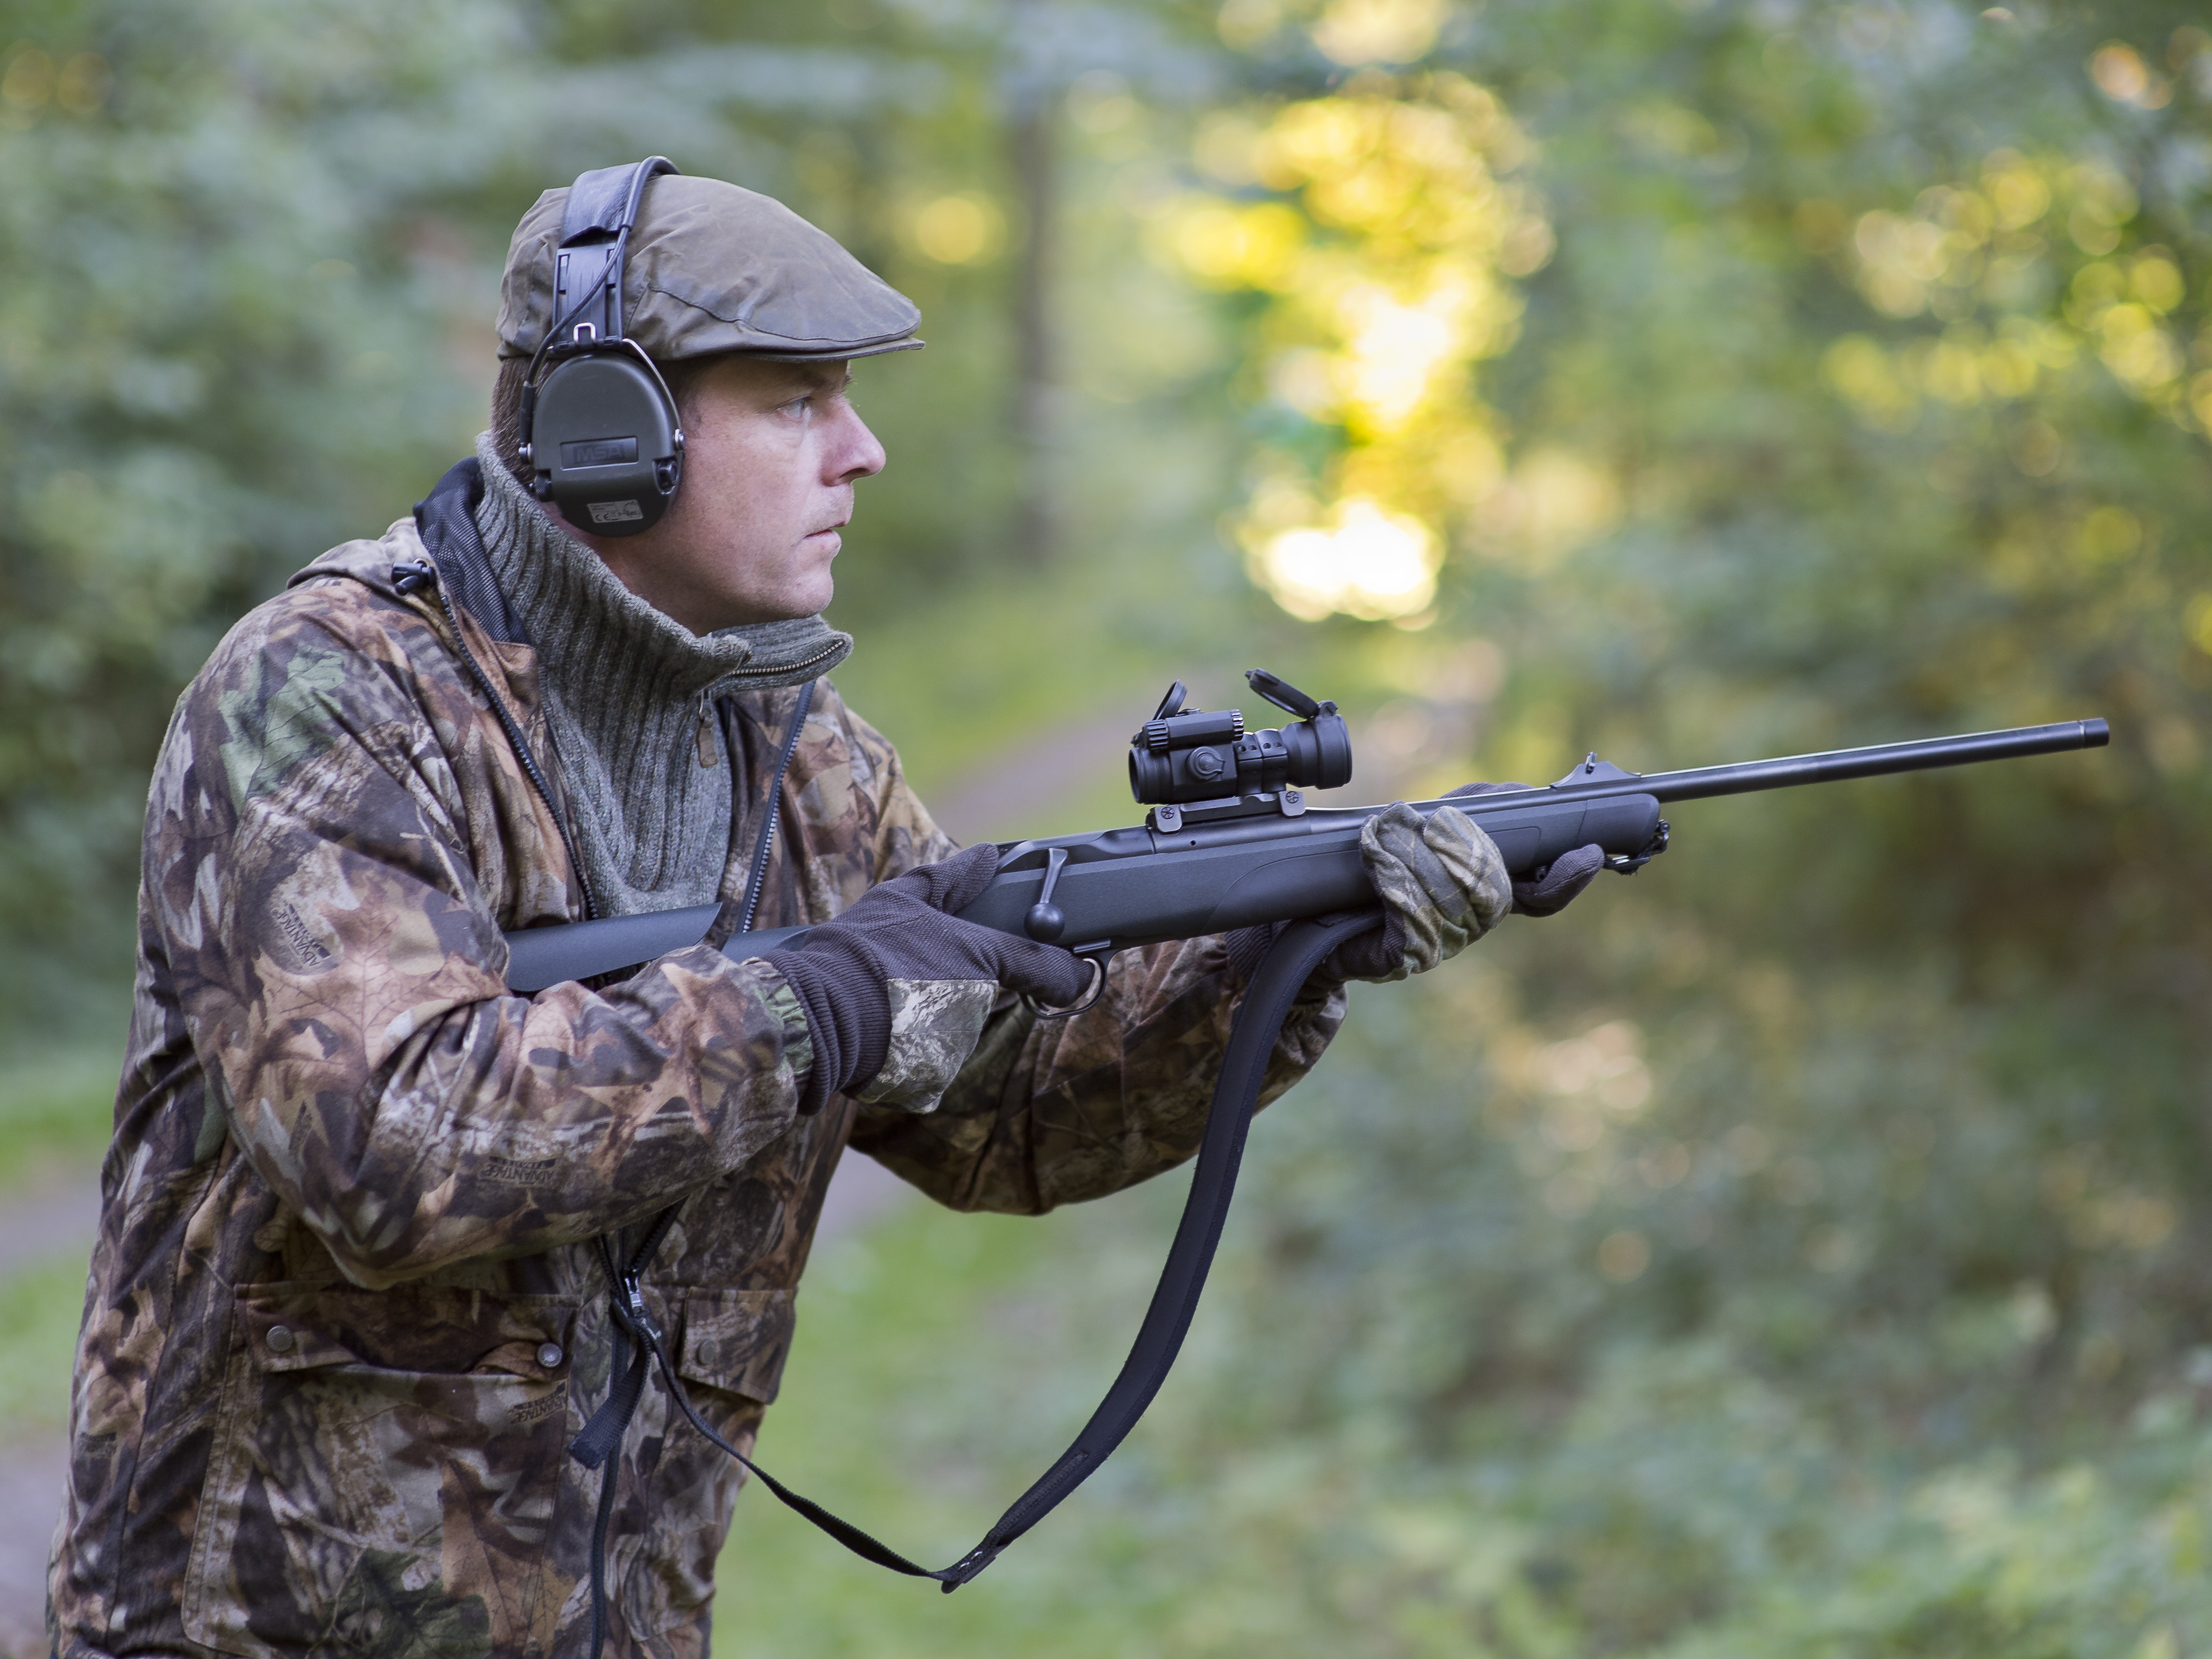 Aimpoint CompC3 and Earmuffs